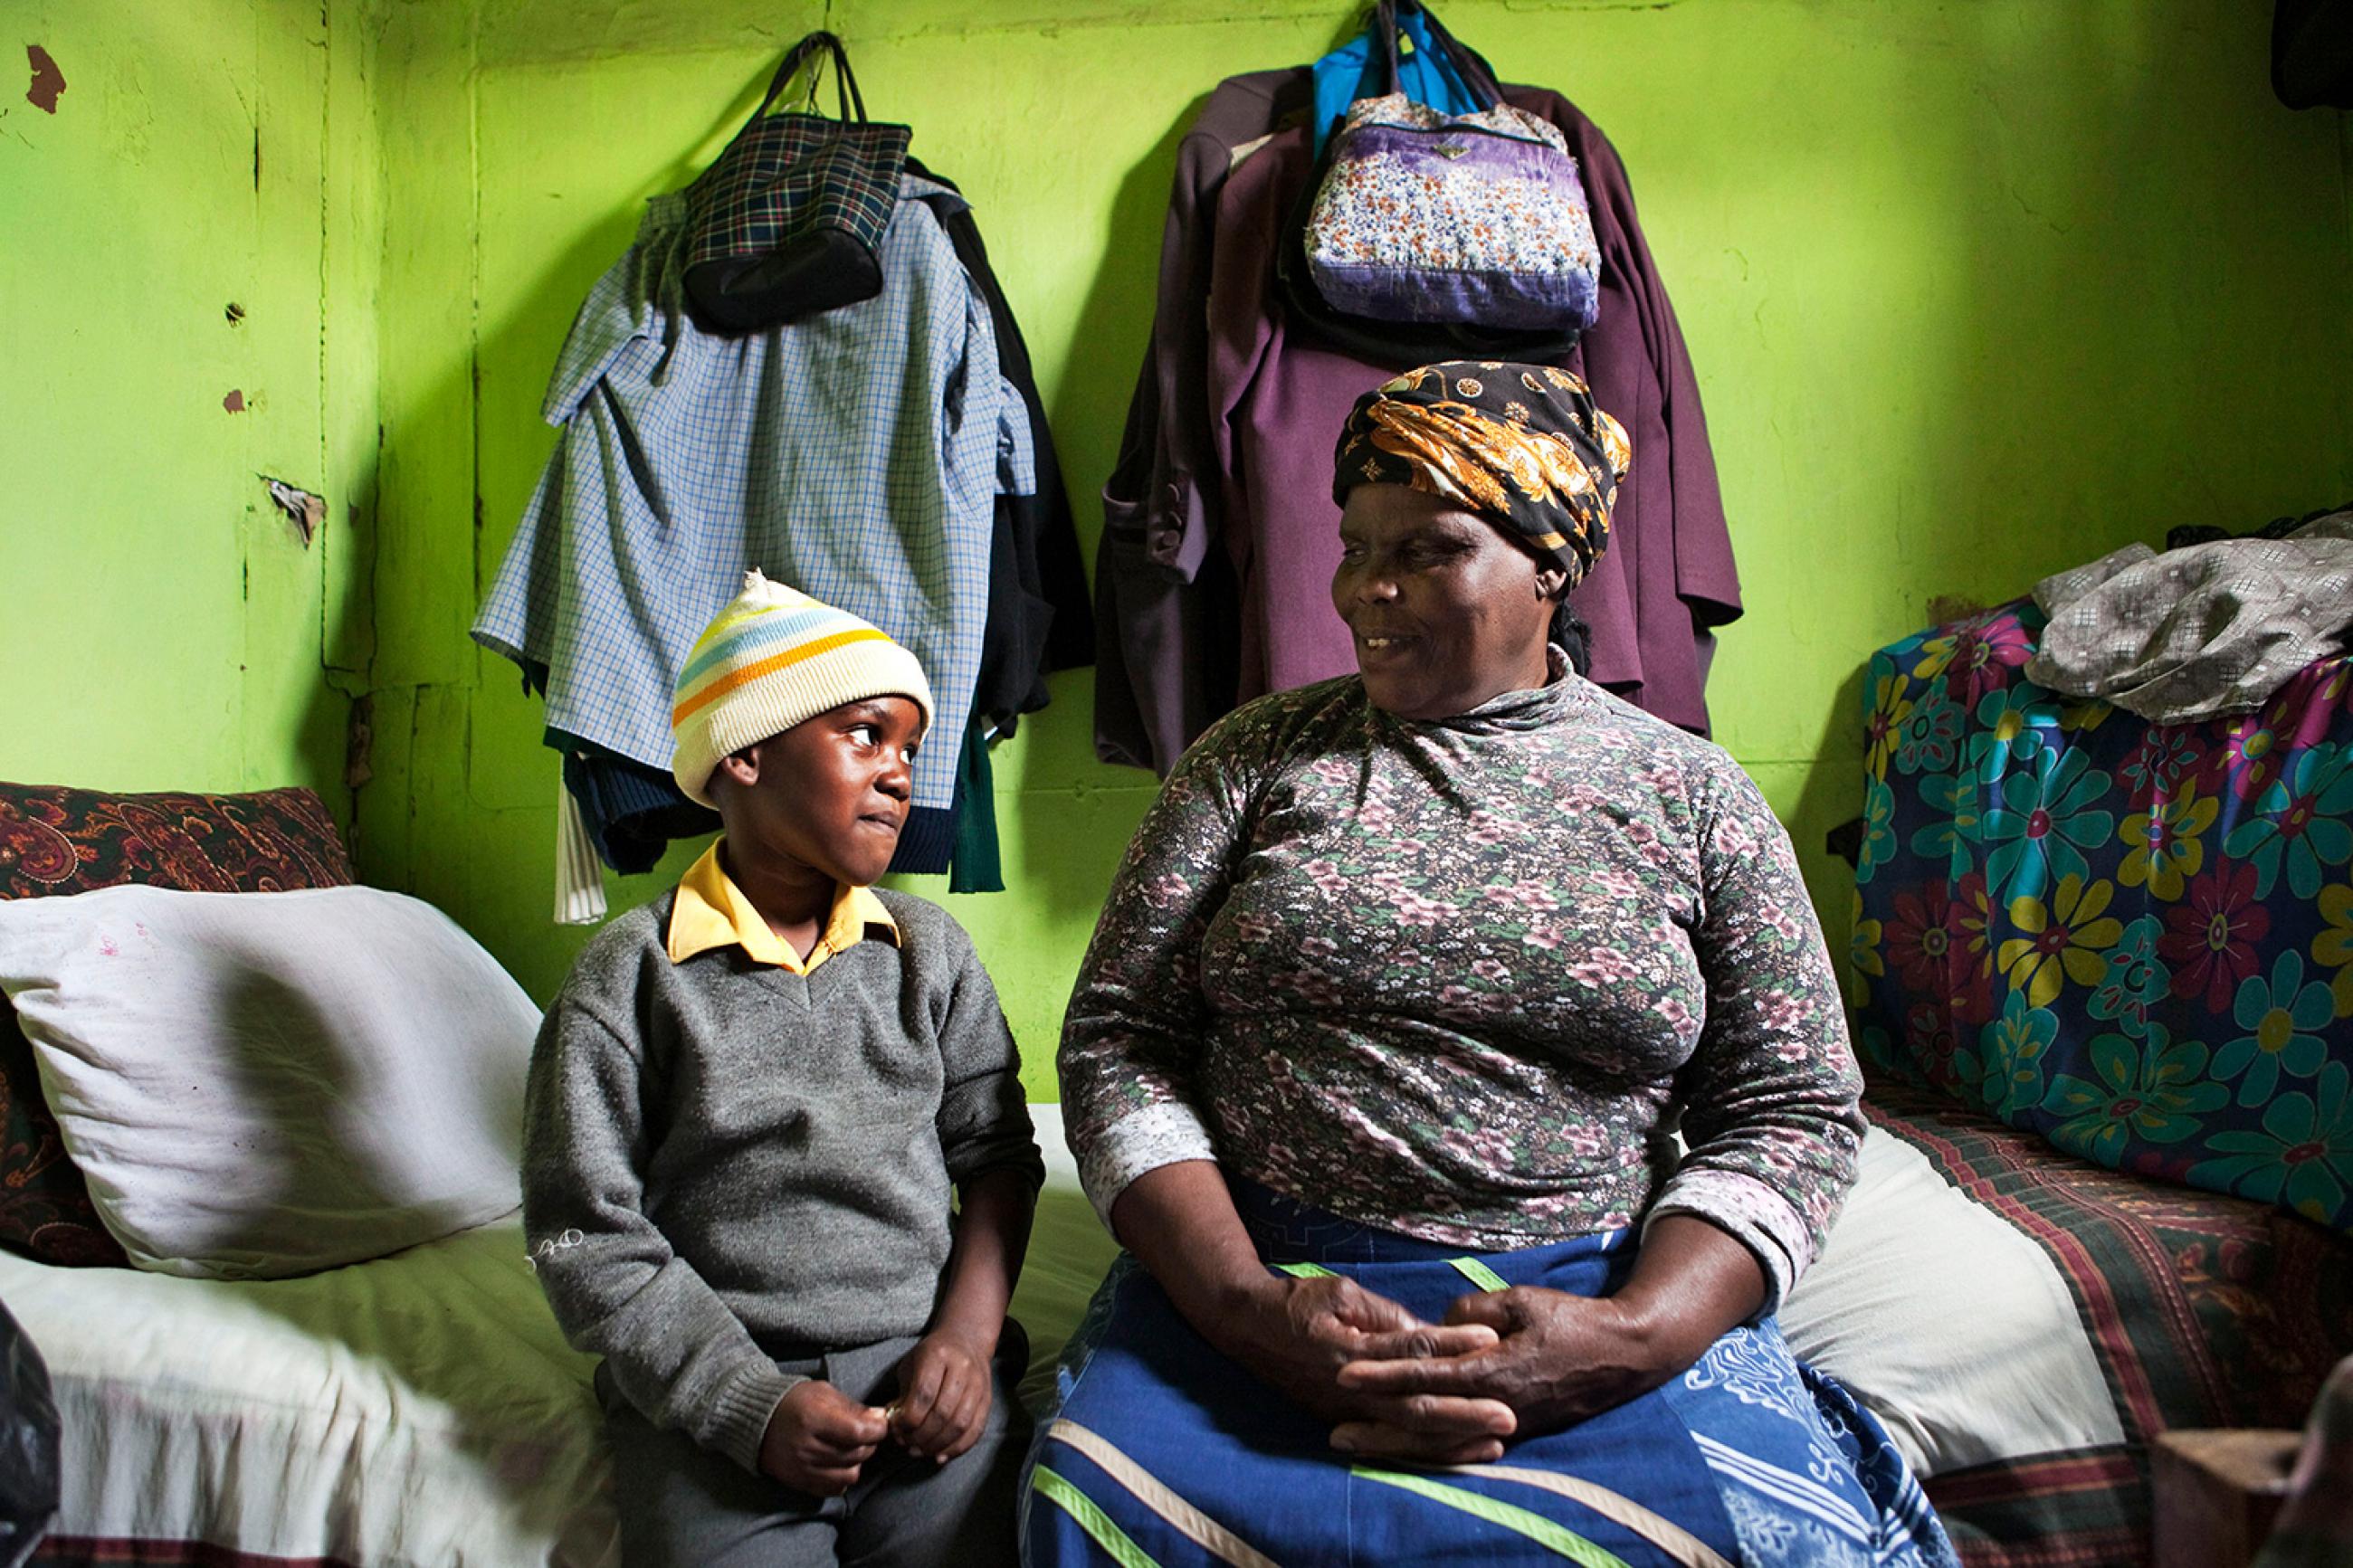 Two ends of the age spectrum: Thenjiwe Madzinga, 66, and grandson Thina Gxotelwa in a small room they share in Cape Town's Khayelitsha township on Feb. 23, 2010. Madzinga cares for five grandchildren. Picture shows the pair sitting on a bed in a small room with bright green walls. She is looking lovingly at him, and he is looking at her and smiling, perhaps embarrassed at the camera. REUTERS/Finbarr O'Reilly